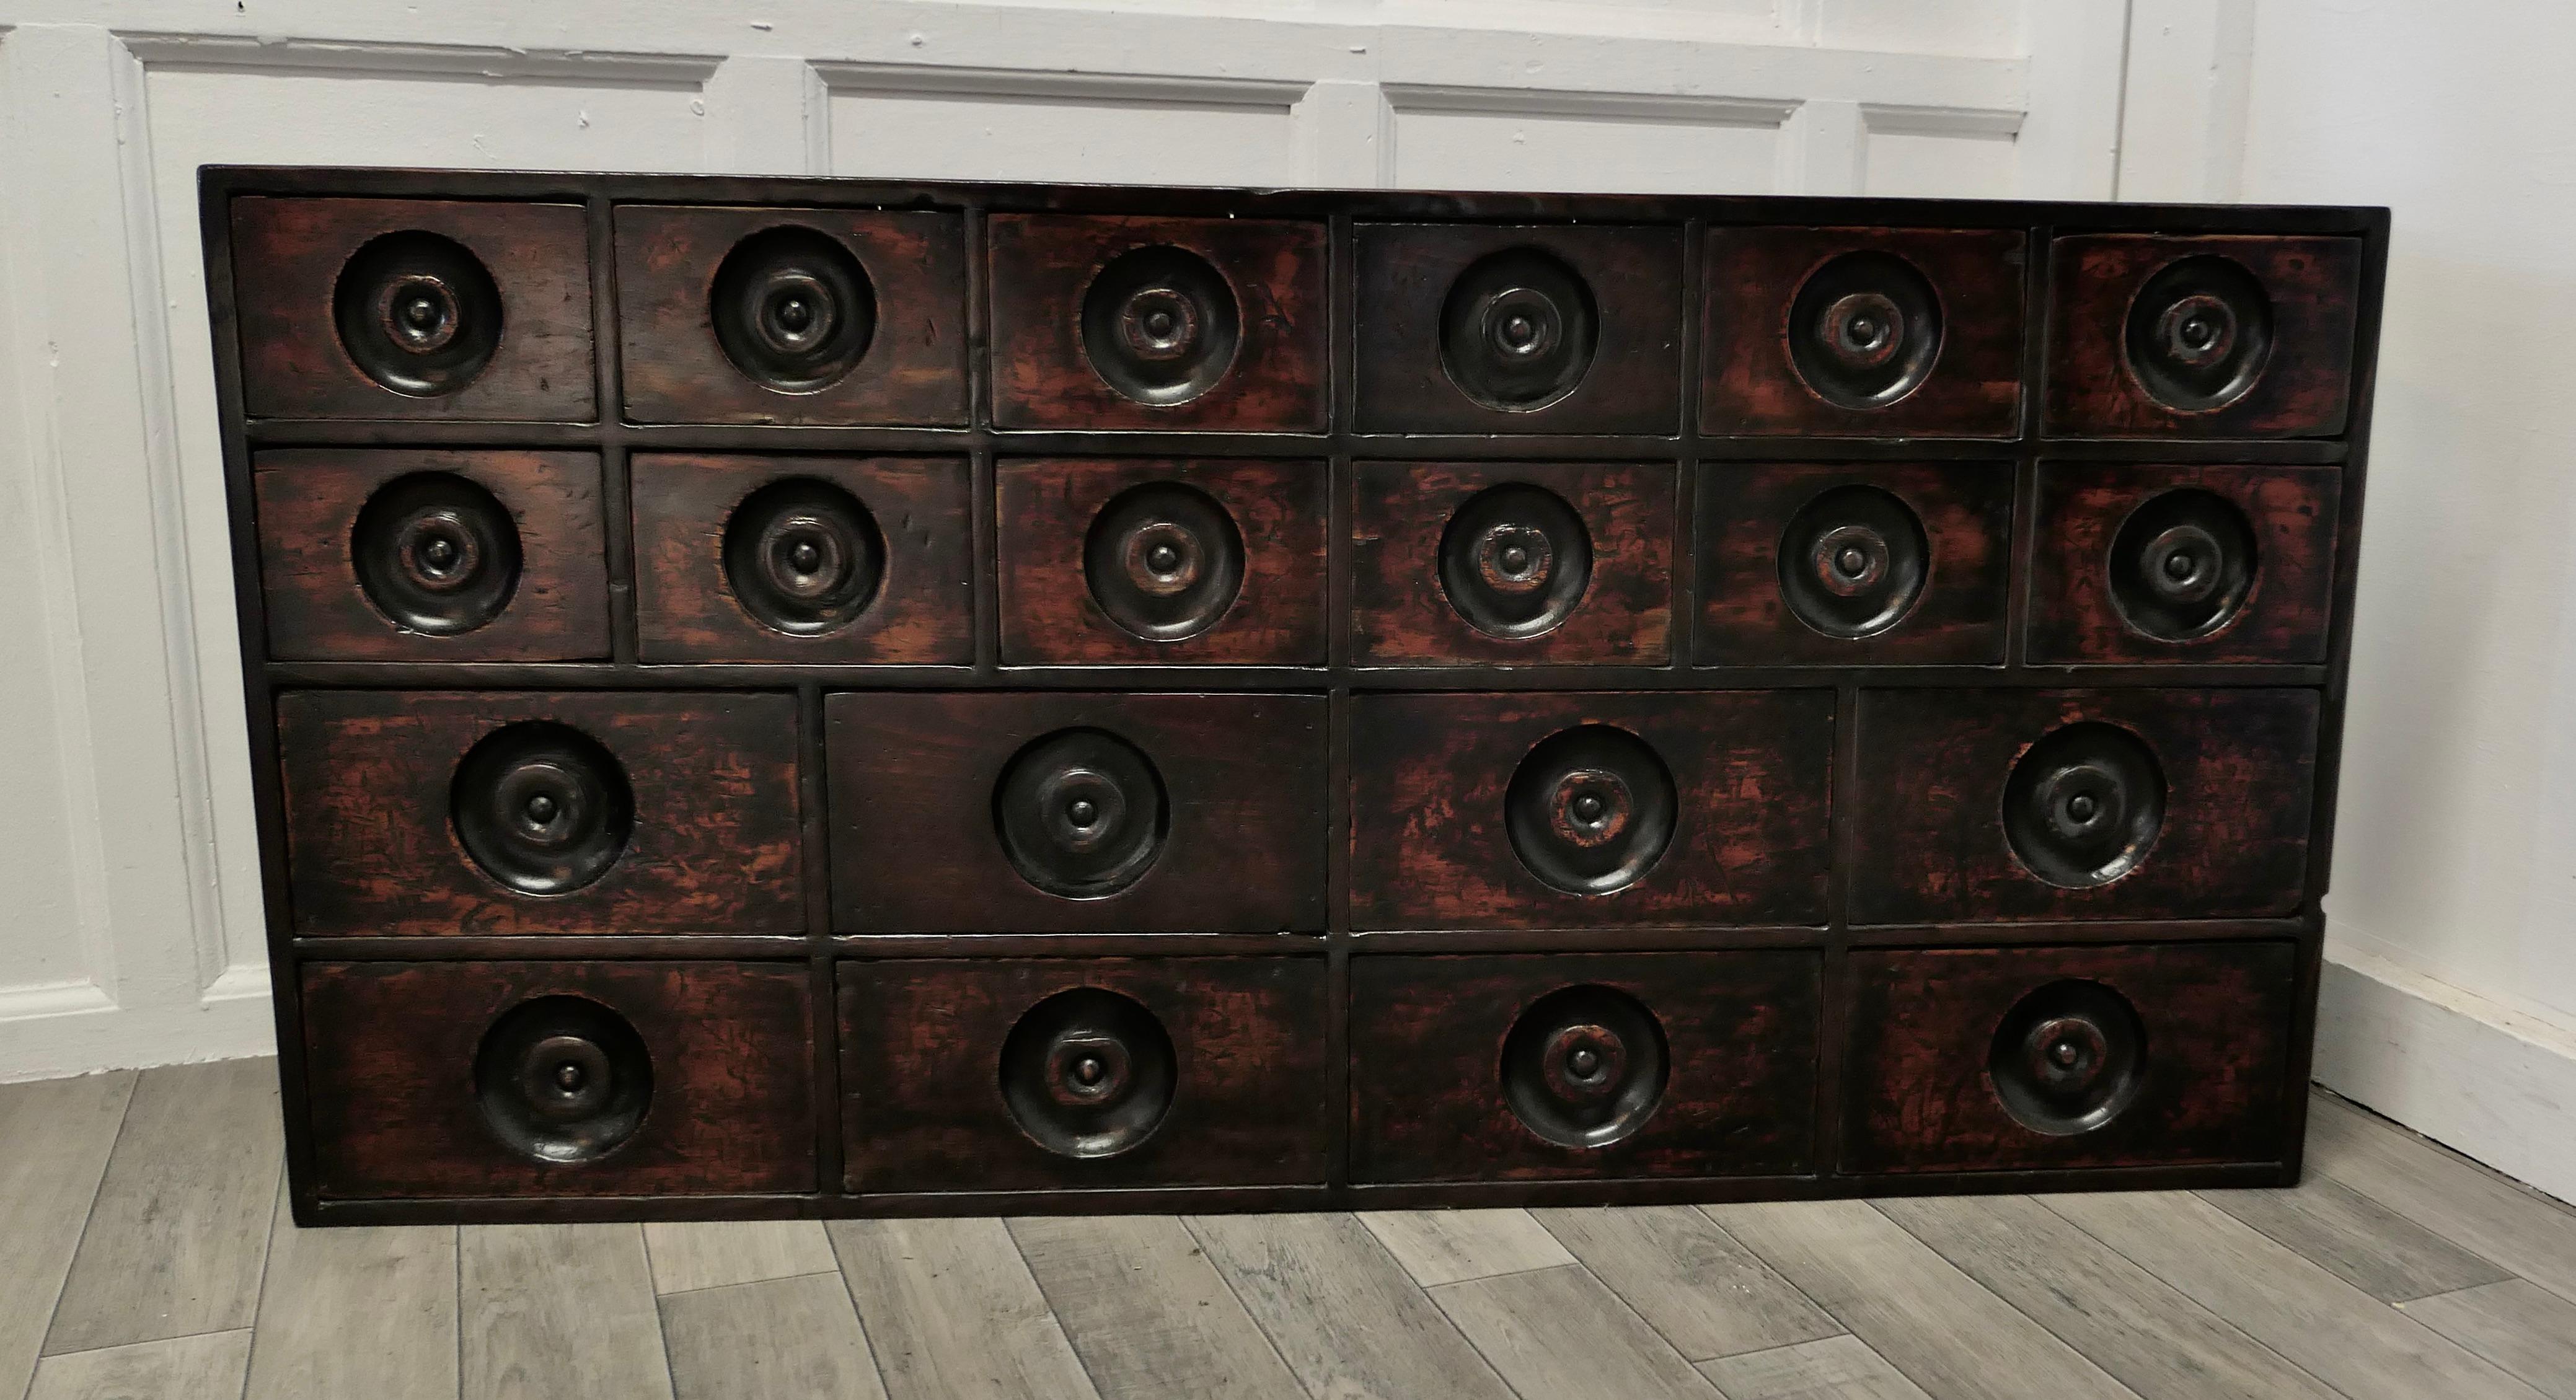 19th century Chemist drawers 20 drawer Pharmacists cabinet

This is a delightful piece of Social History, it has been made in to a free standing Chest of Drawers, originally it would have been part of a much larger bank of drawers from a Chemist